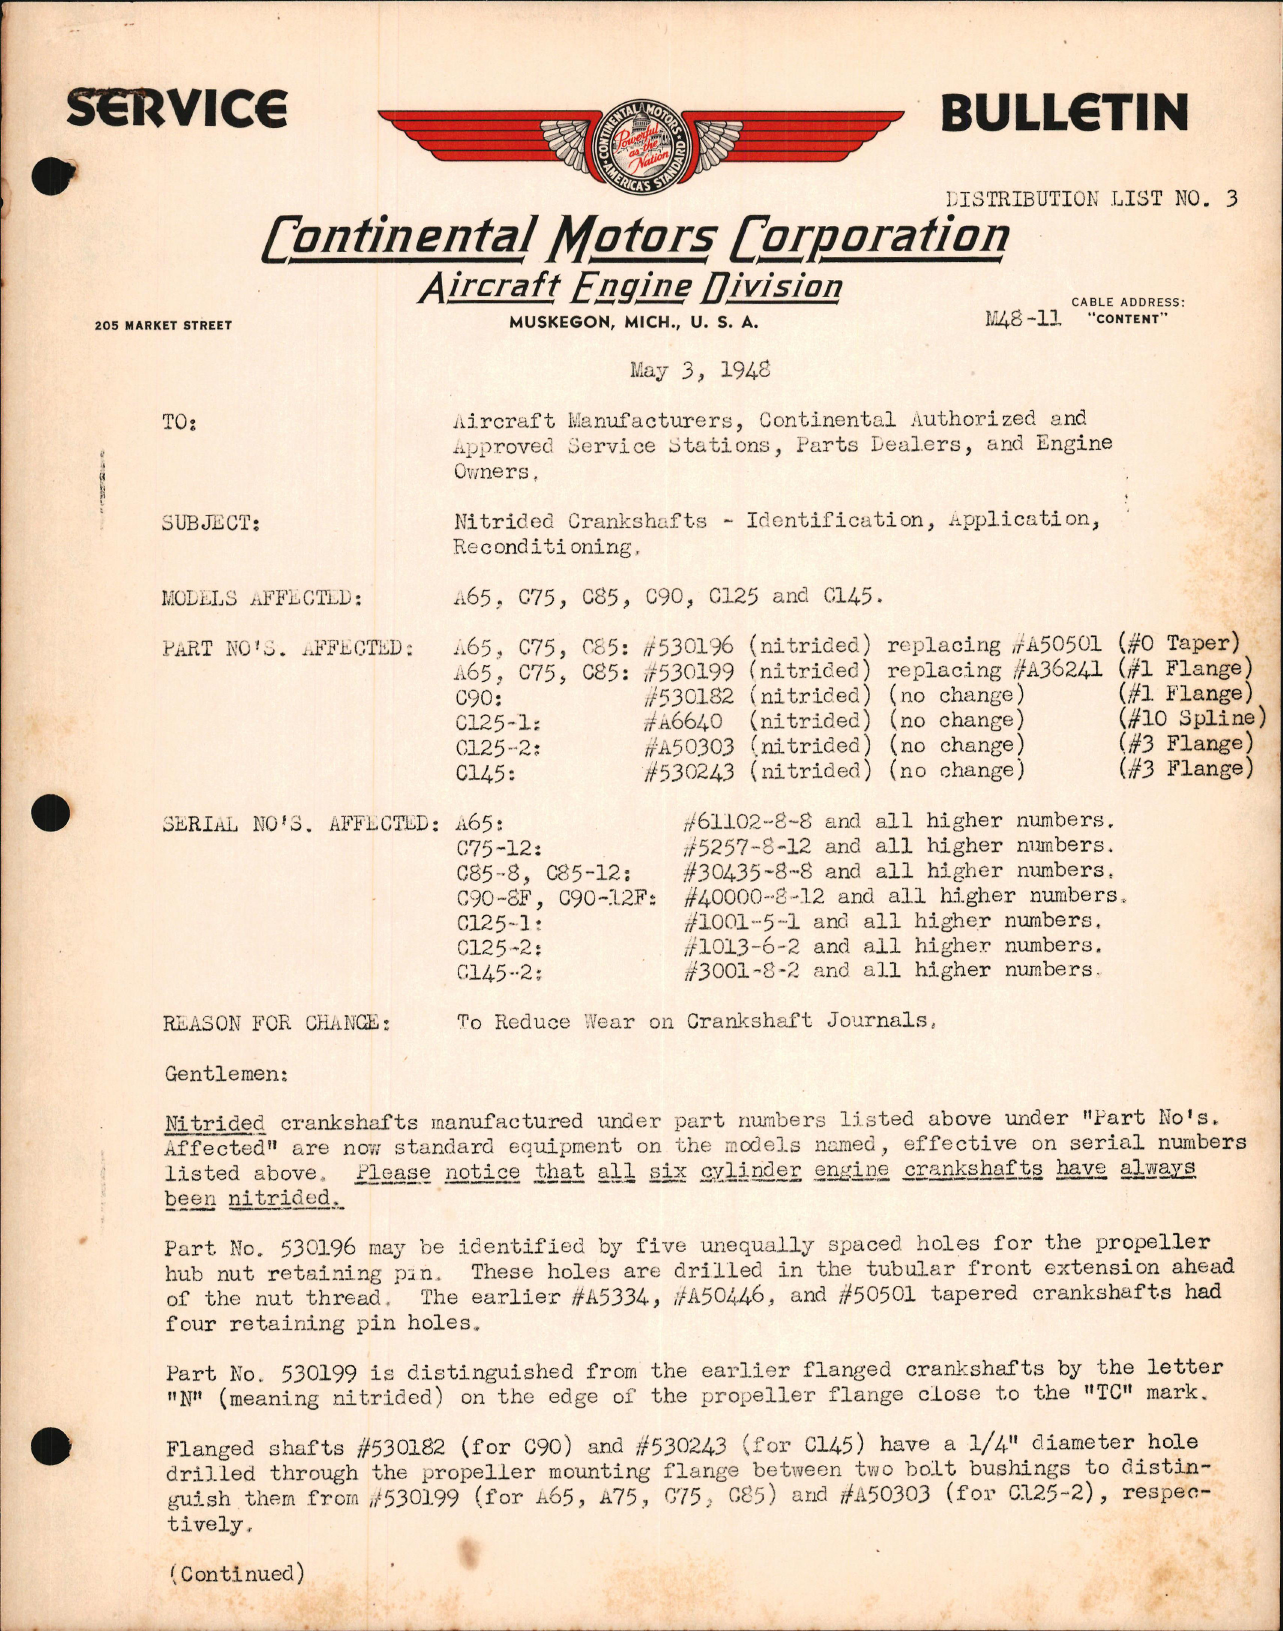 Sample page 1 from AirCorps Library document: Nitrided Crankshafts - Identification. Application, Reconditioning